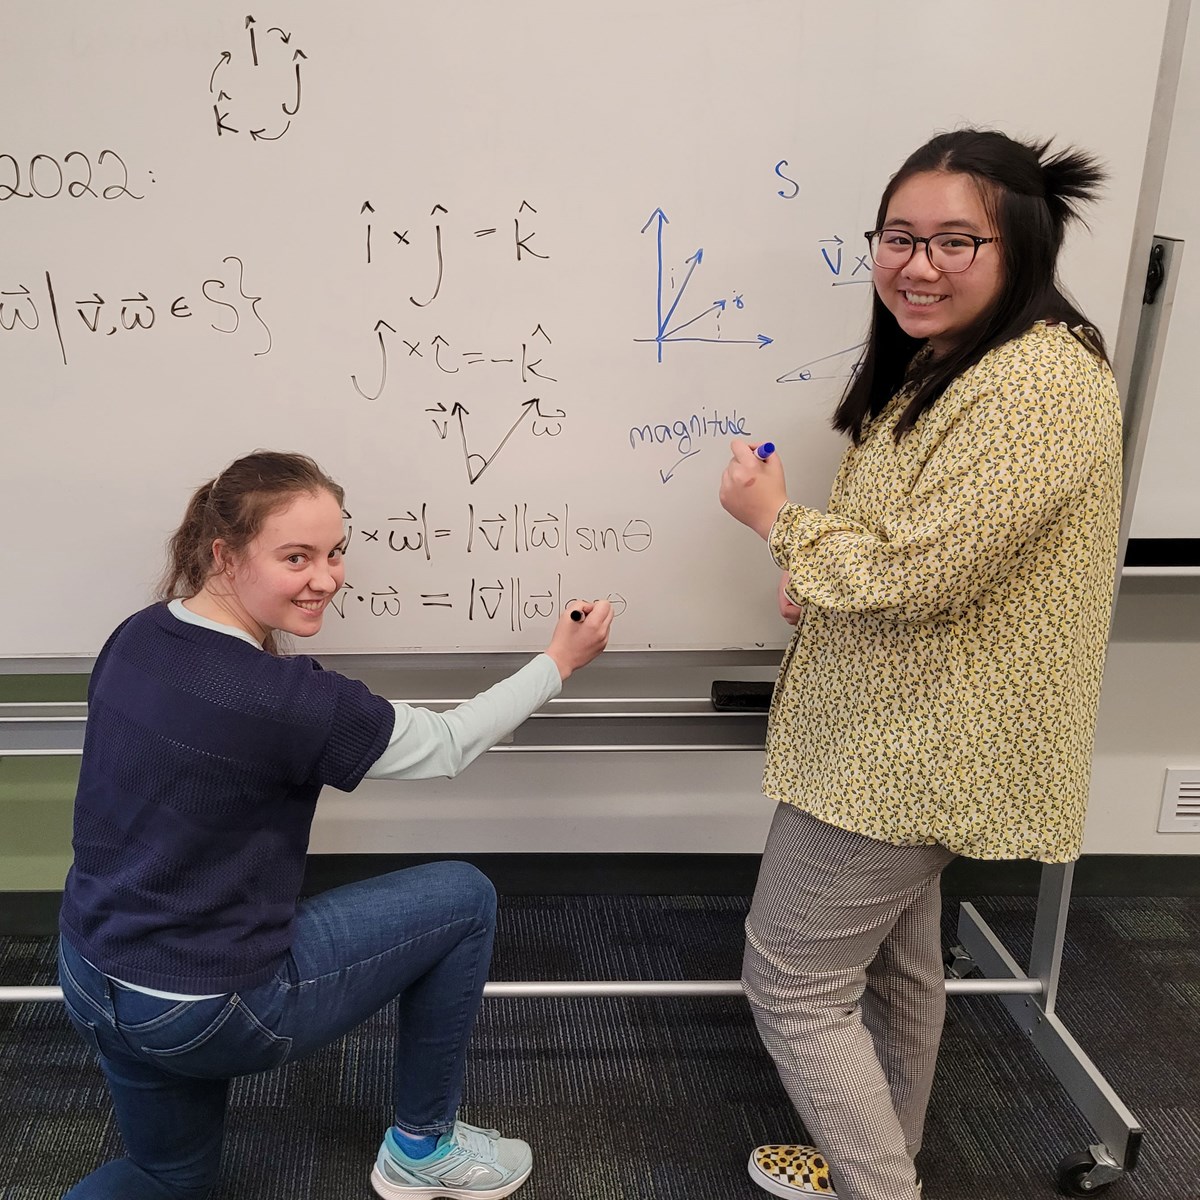 Two Mathematics students working on a math problem on a whiteboard.